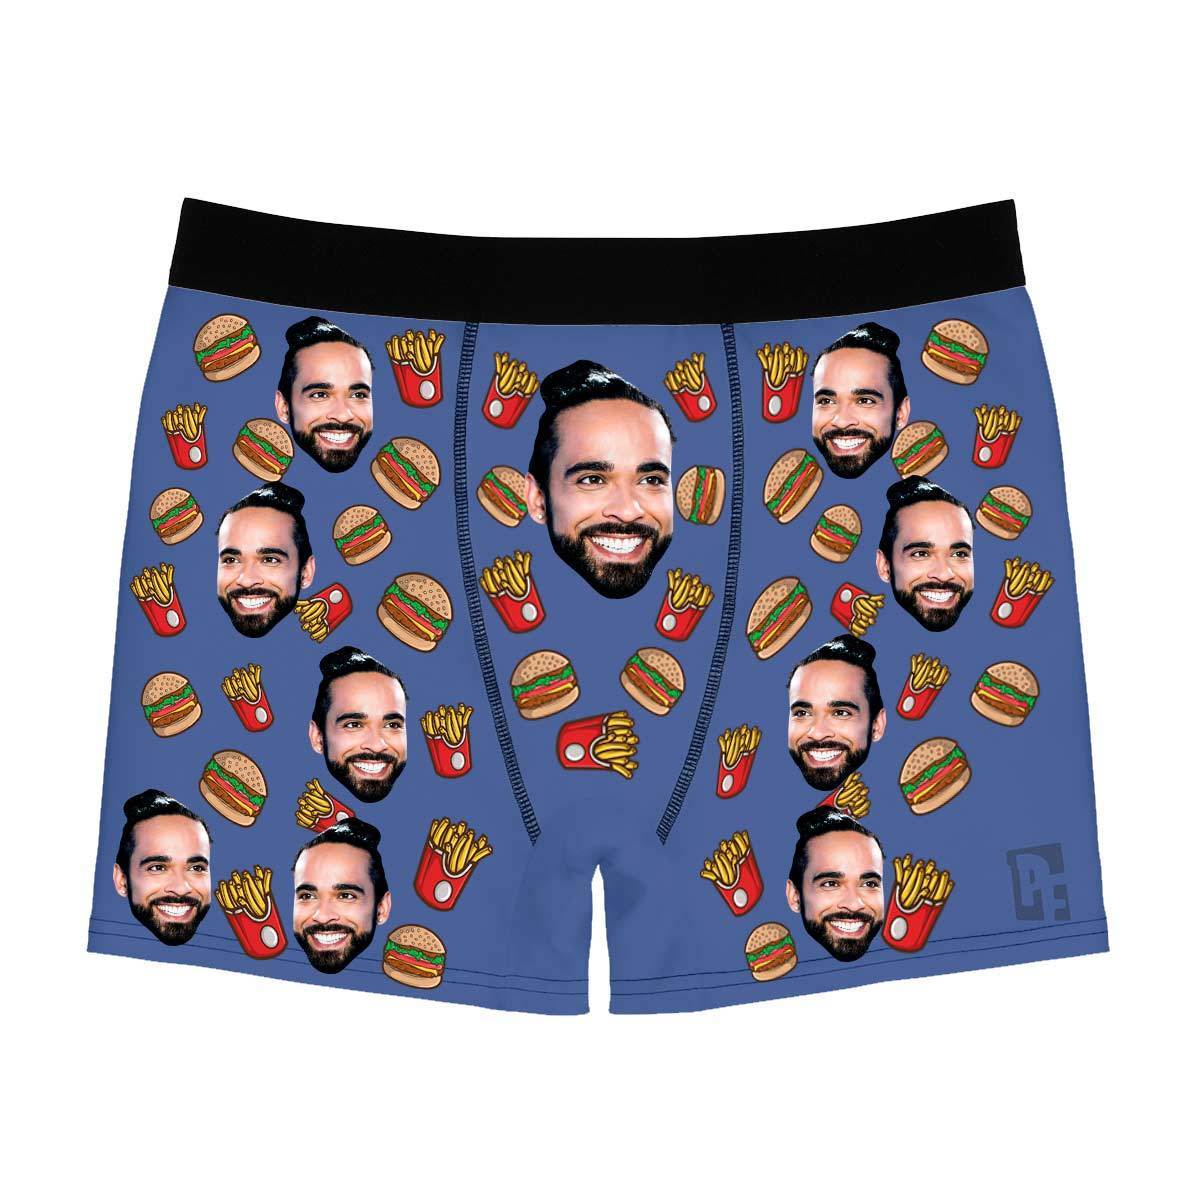 Darkblue Fastfood men's boxer briefs personalized with photo printed on them